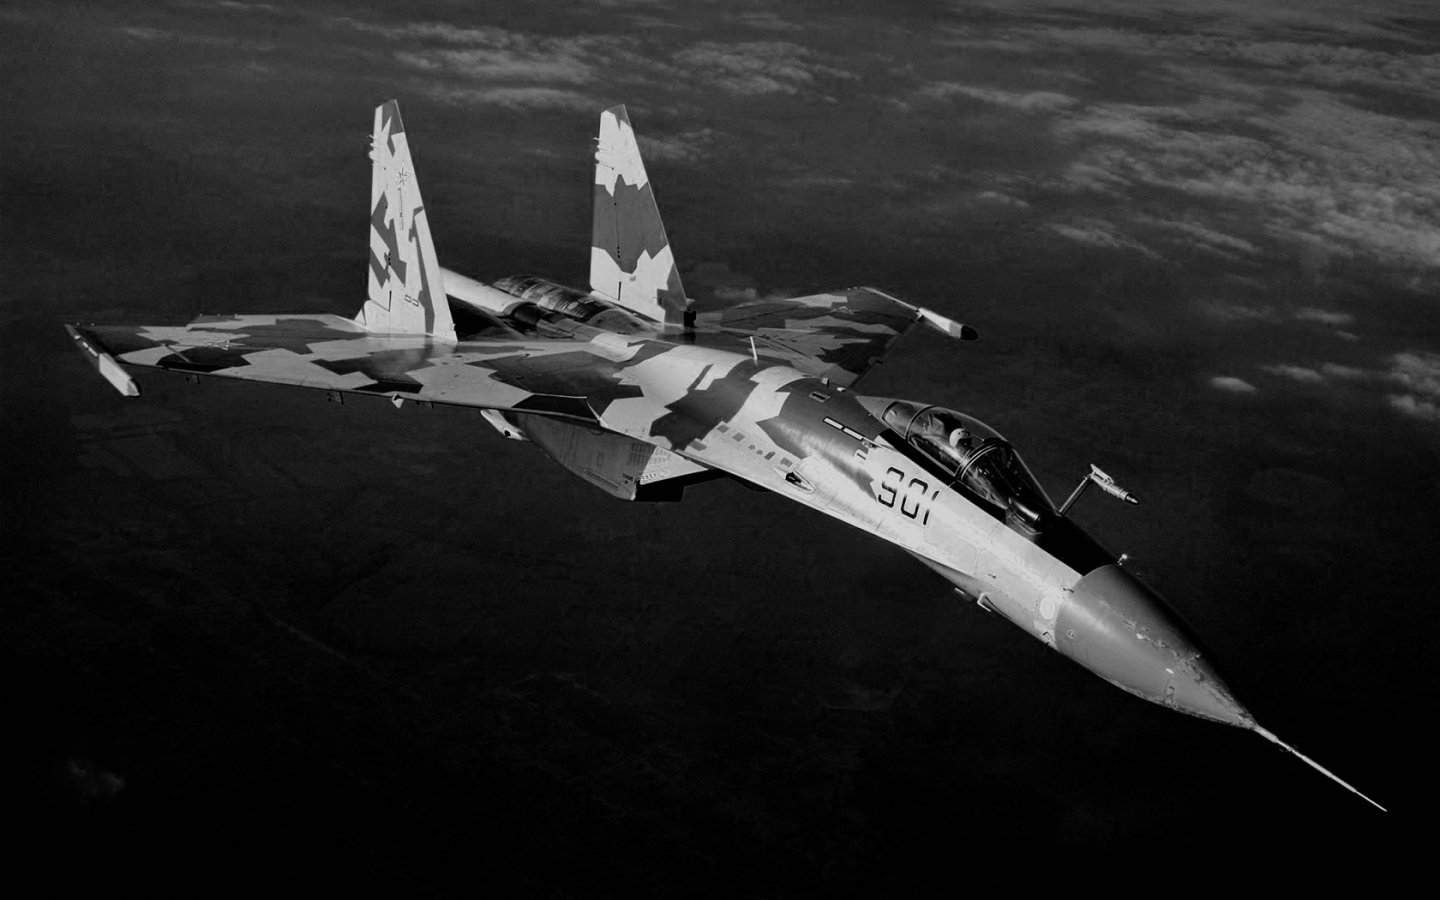 Pavel Sukhoi Airplanes - HD Wallpapers Widescreen - 1440x900